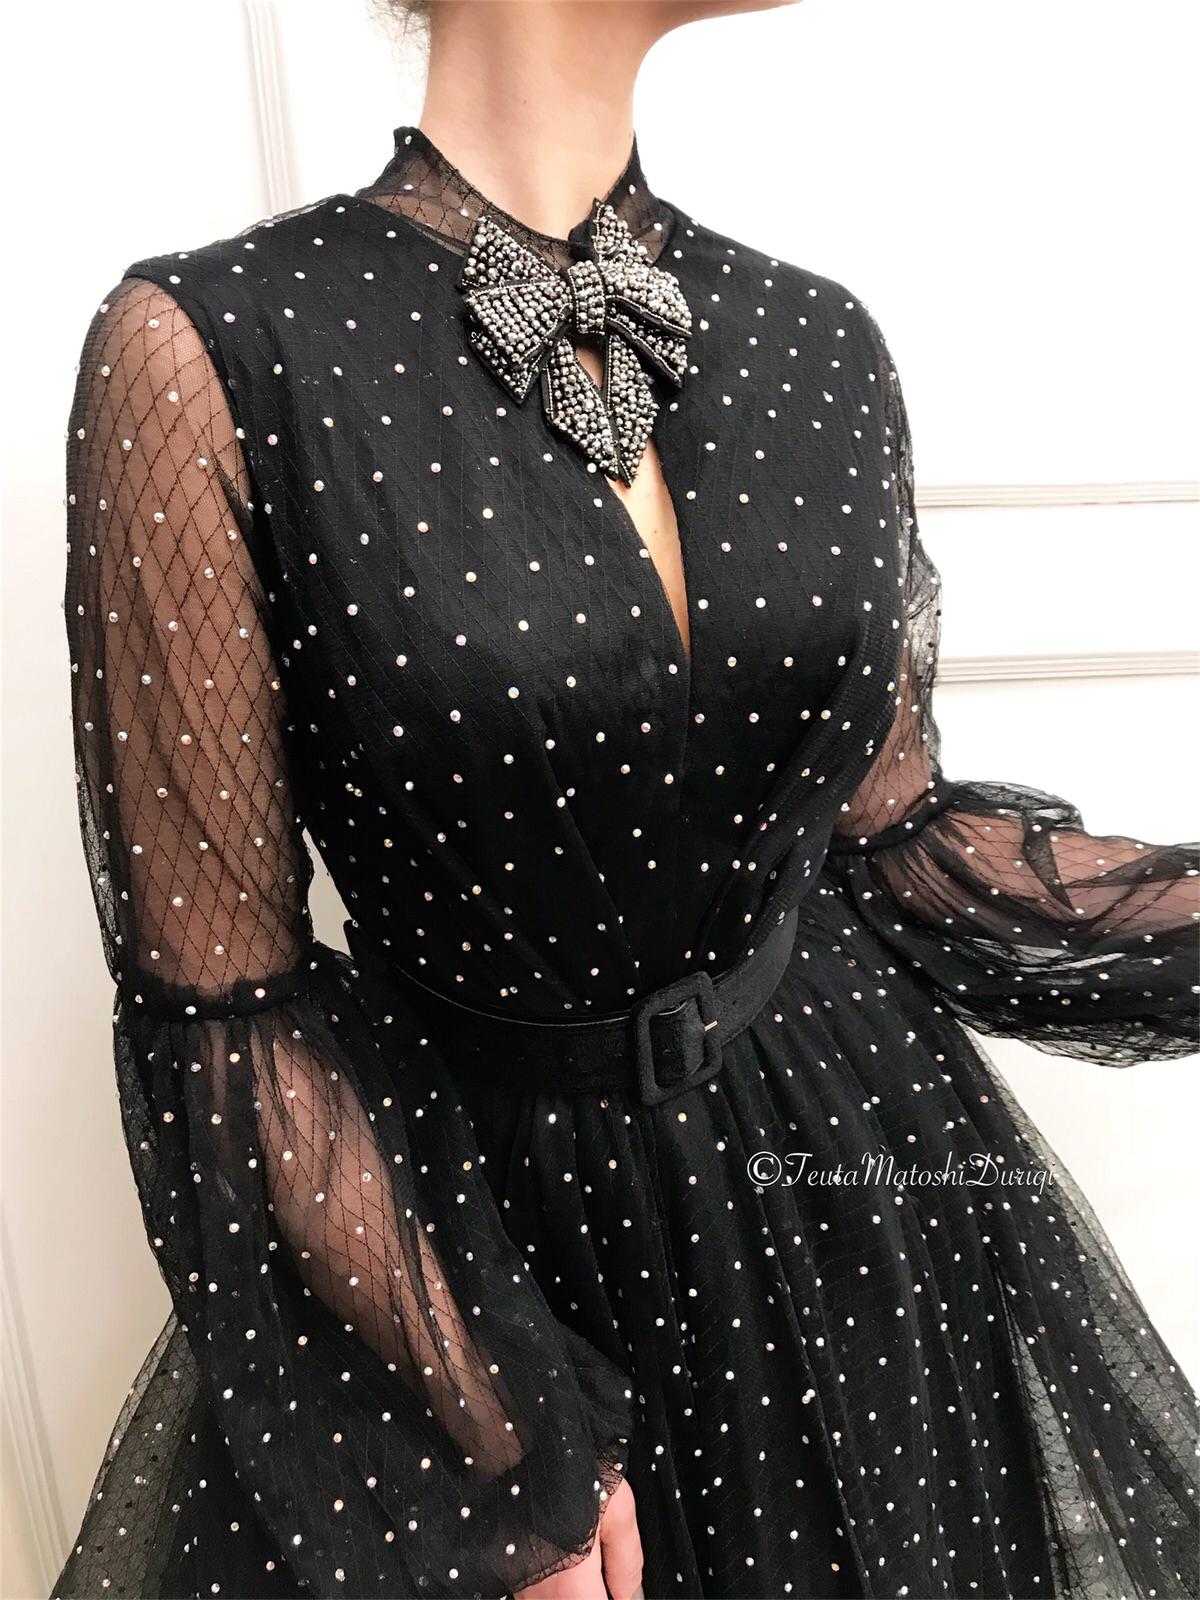 Black A-Line dress with belt, long sleeves, embroidery and dotted fabric